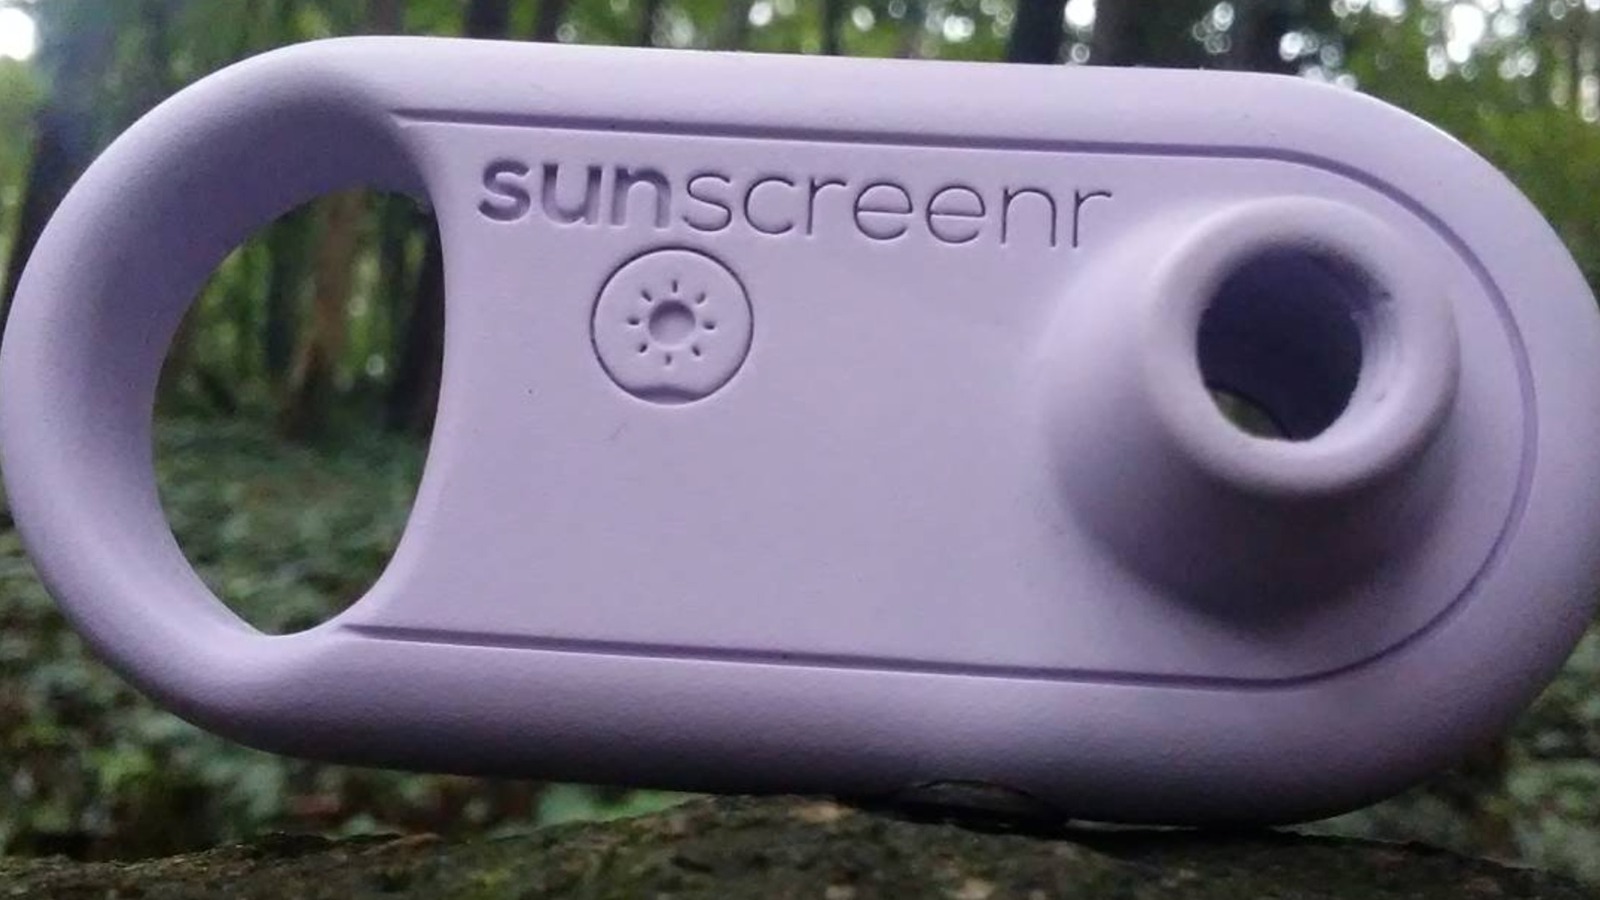 What Happened To Sunscreenr After Shark Tank?